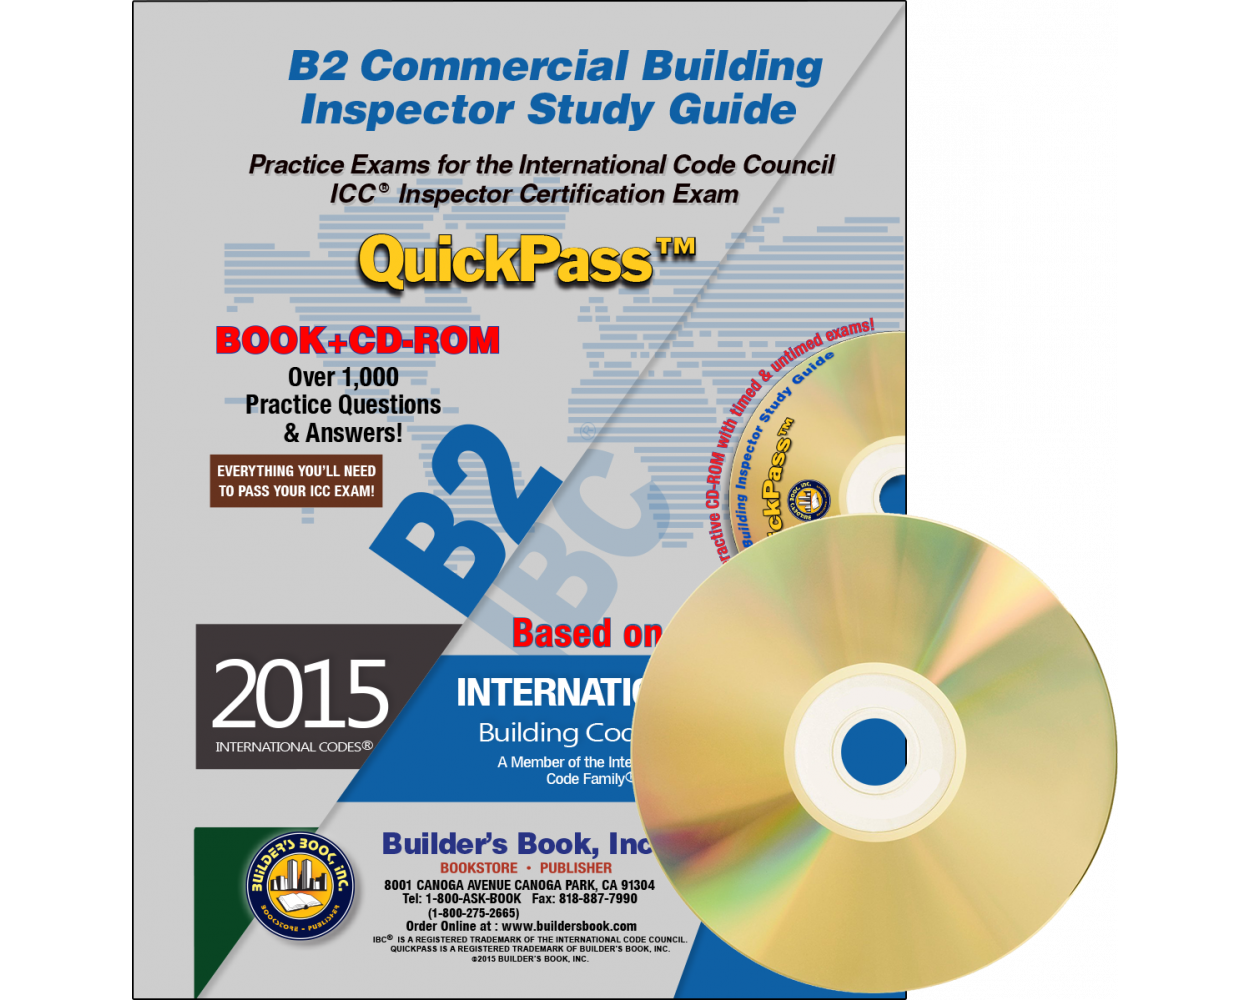 B2 Commercial Building Inspector QuickPass Study Guide Based on 2015